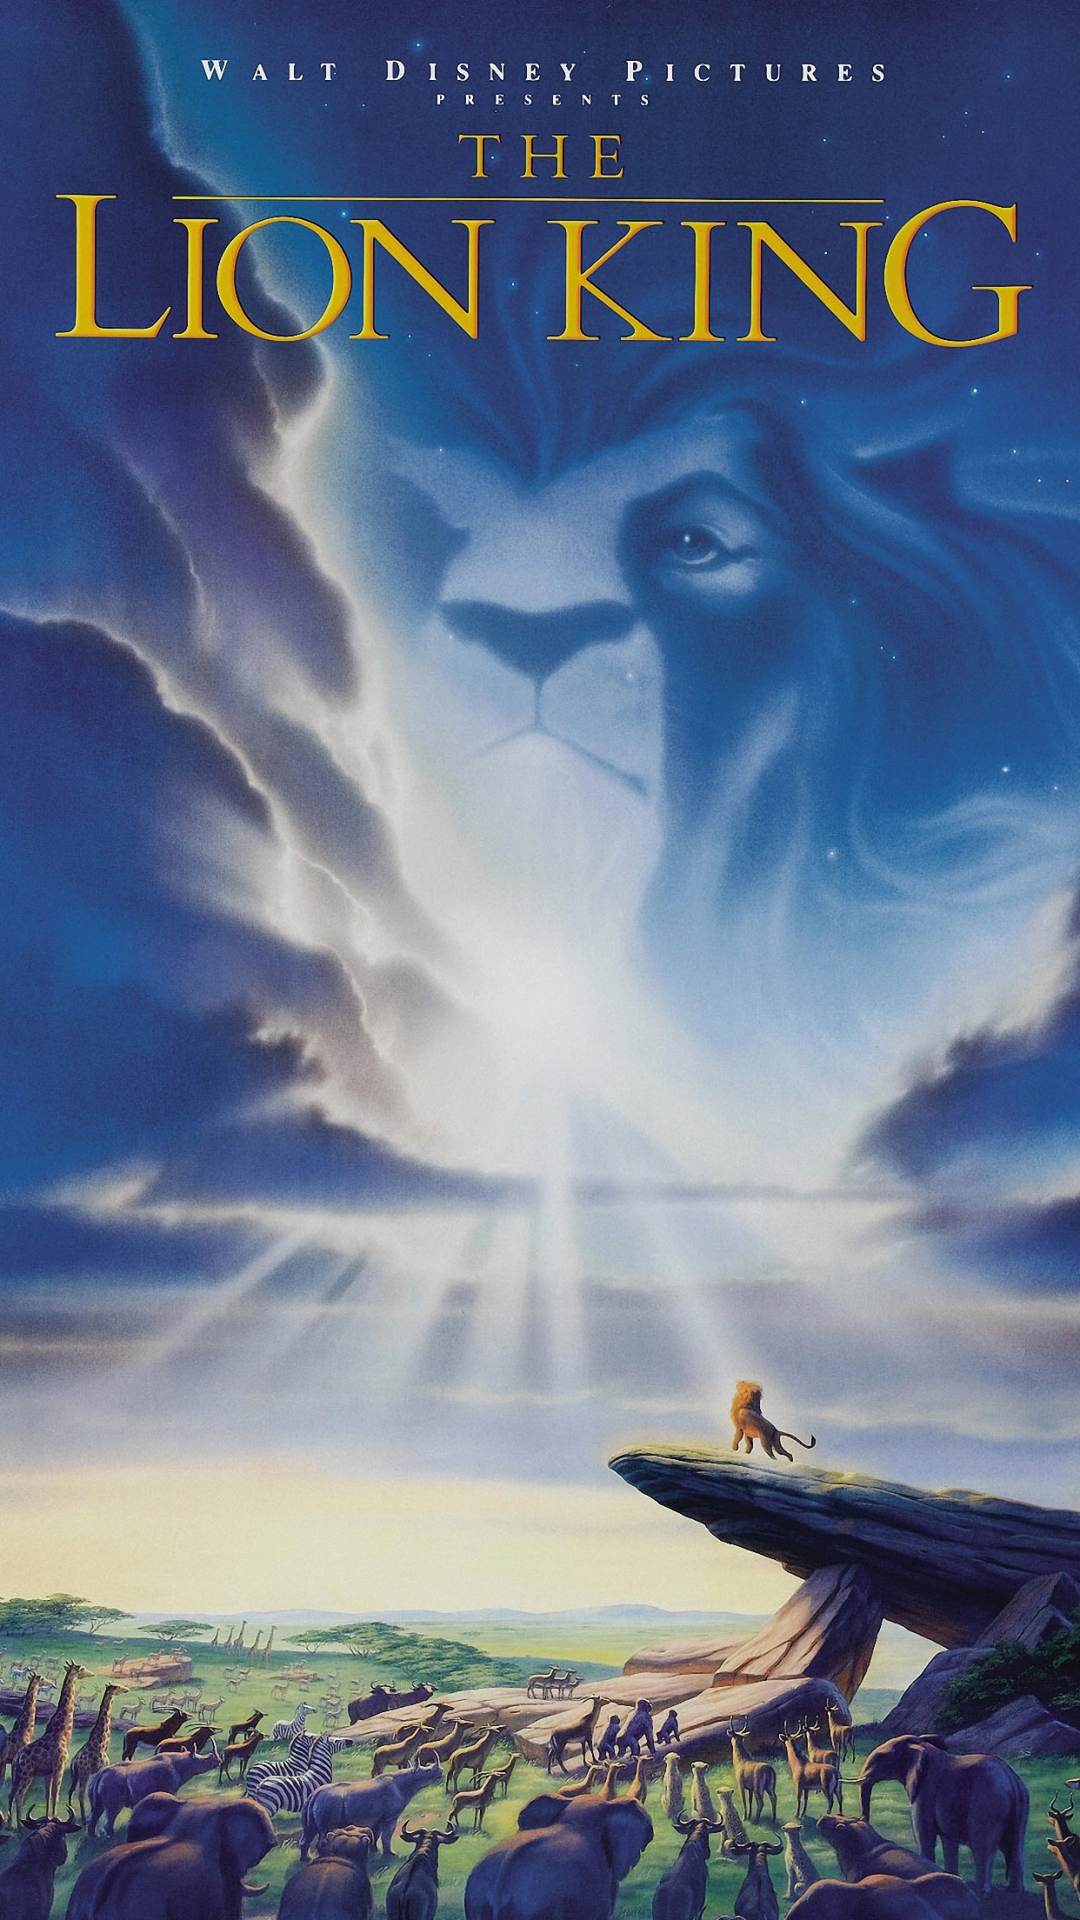 The Lion King Iphone 6 Wallpapers Hd - Hd Lion King Wallpapers For Iphone - HD Wallpaper 